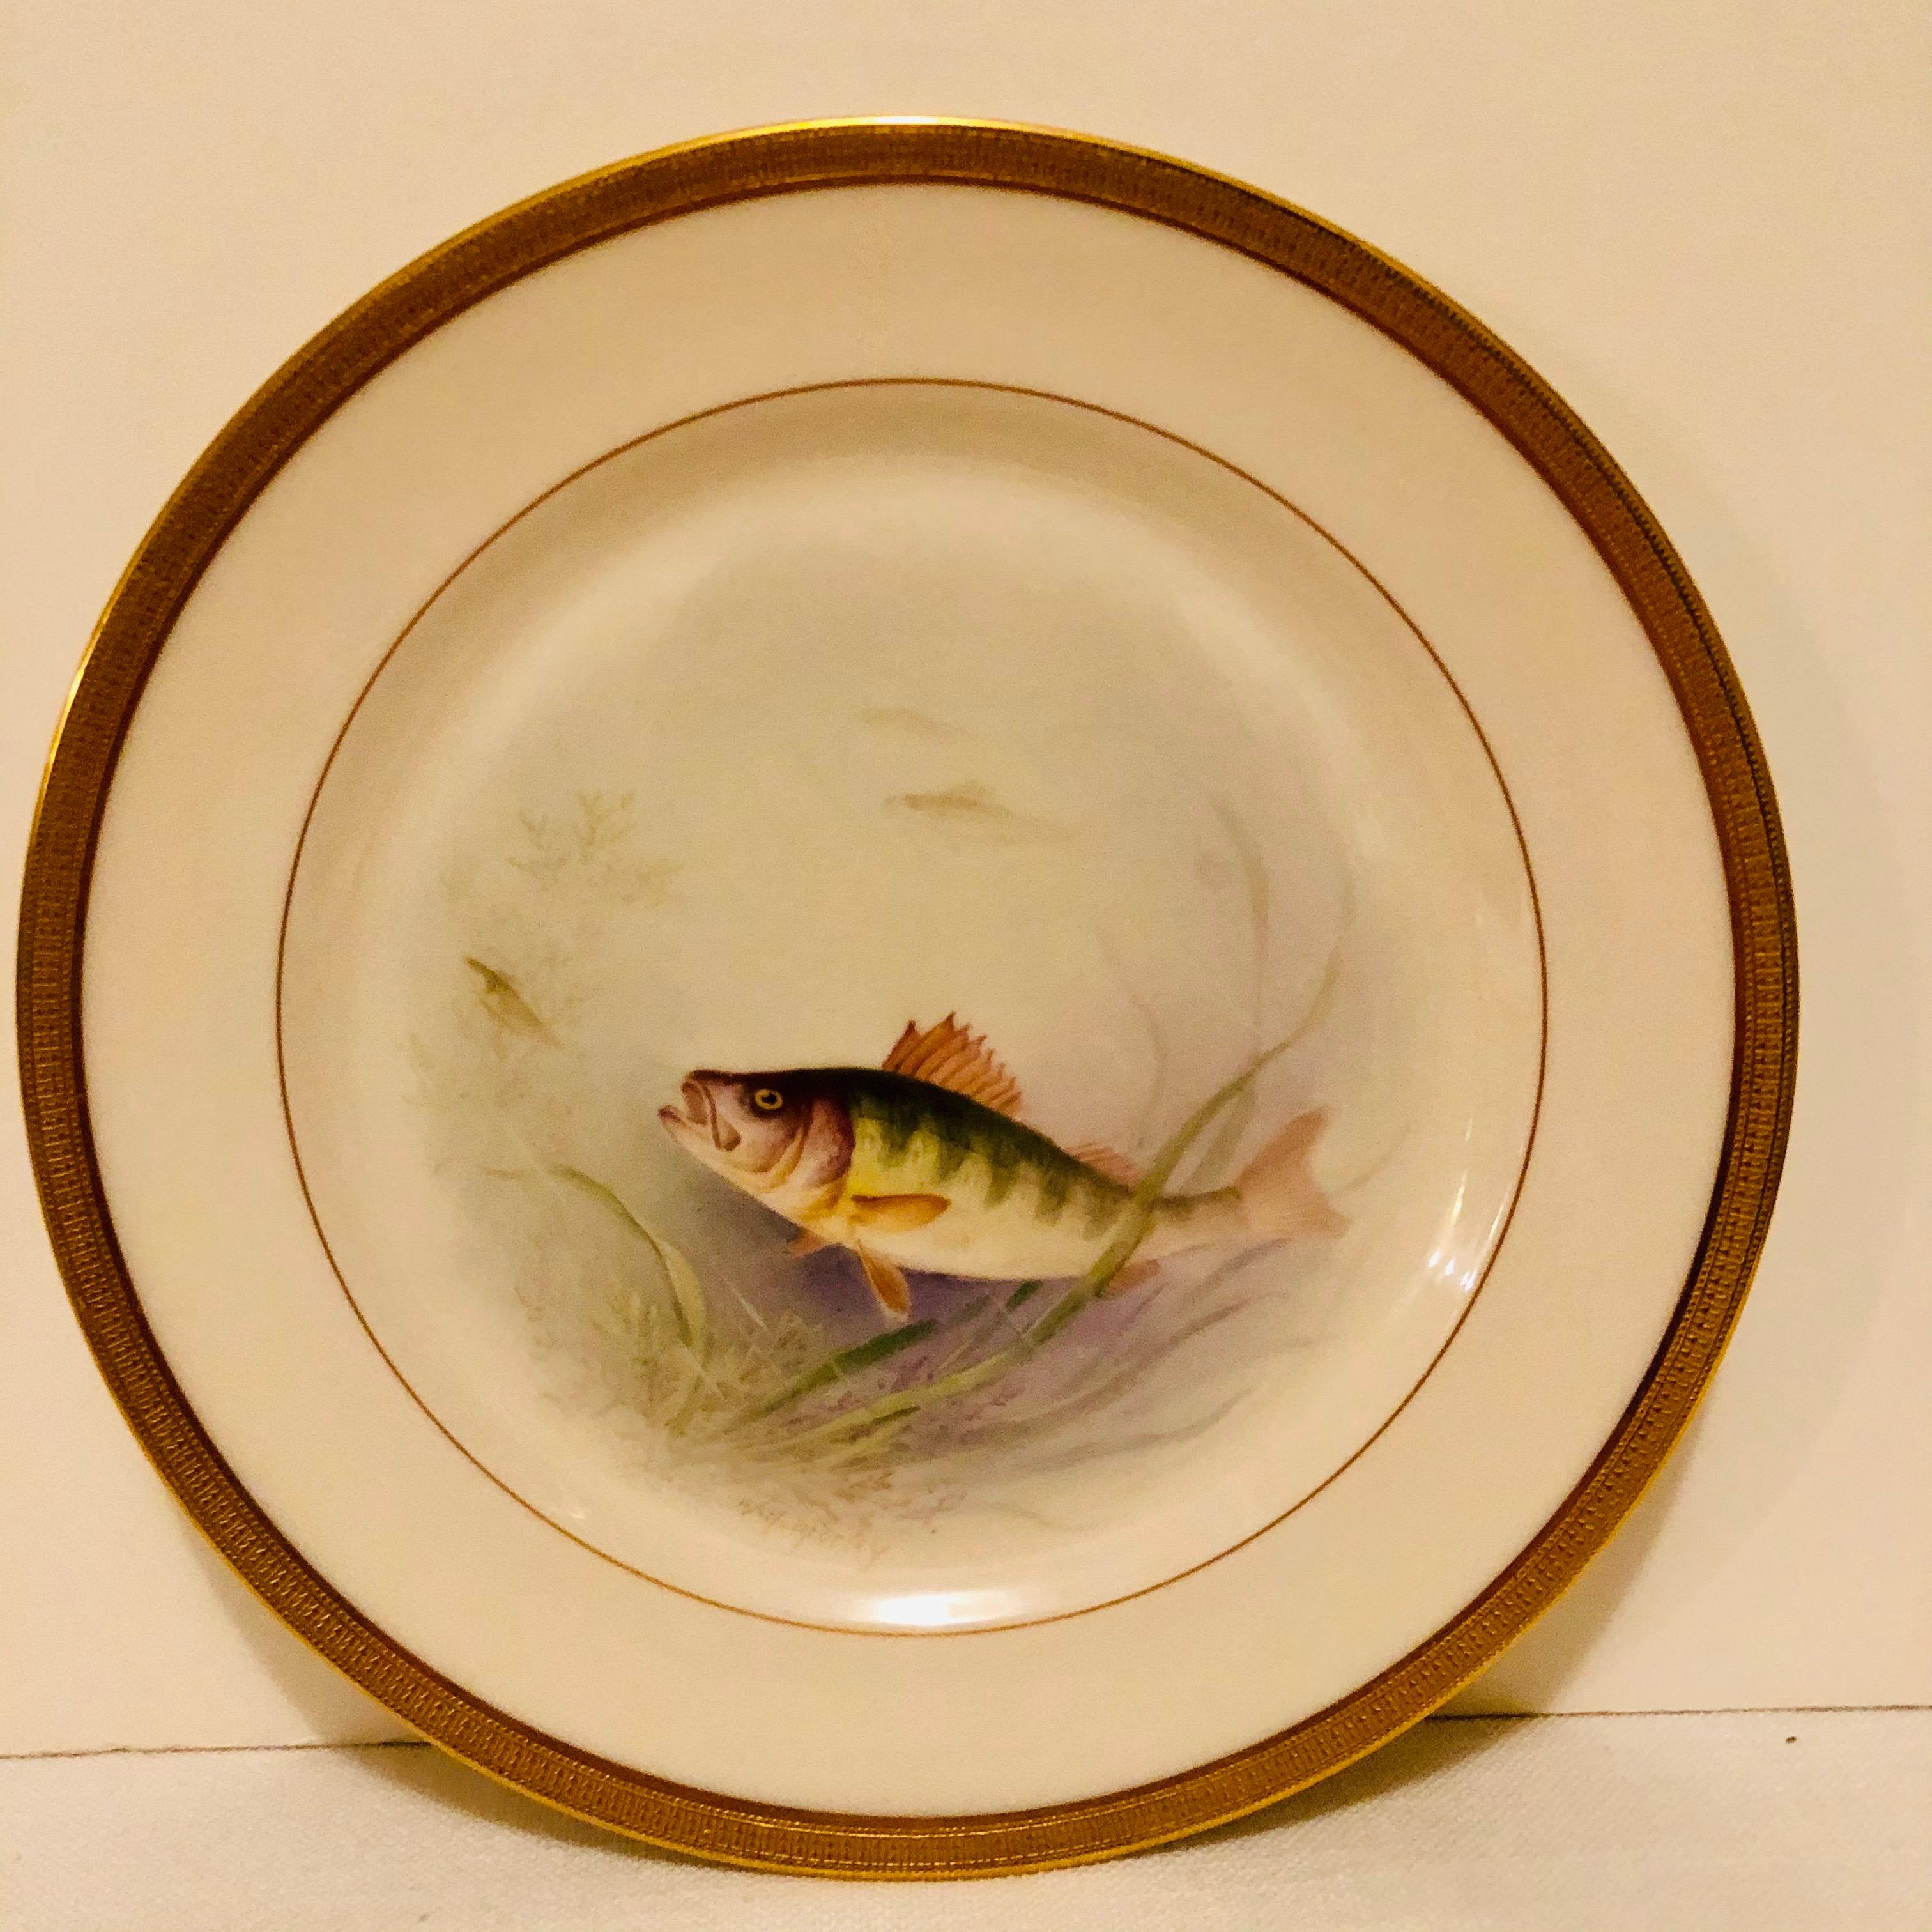 American Set of Lenox Fish Plates Each Painted with Different Fish Artist Signed Morley